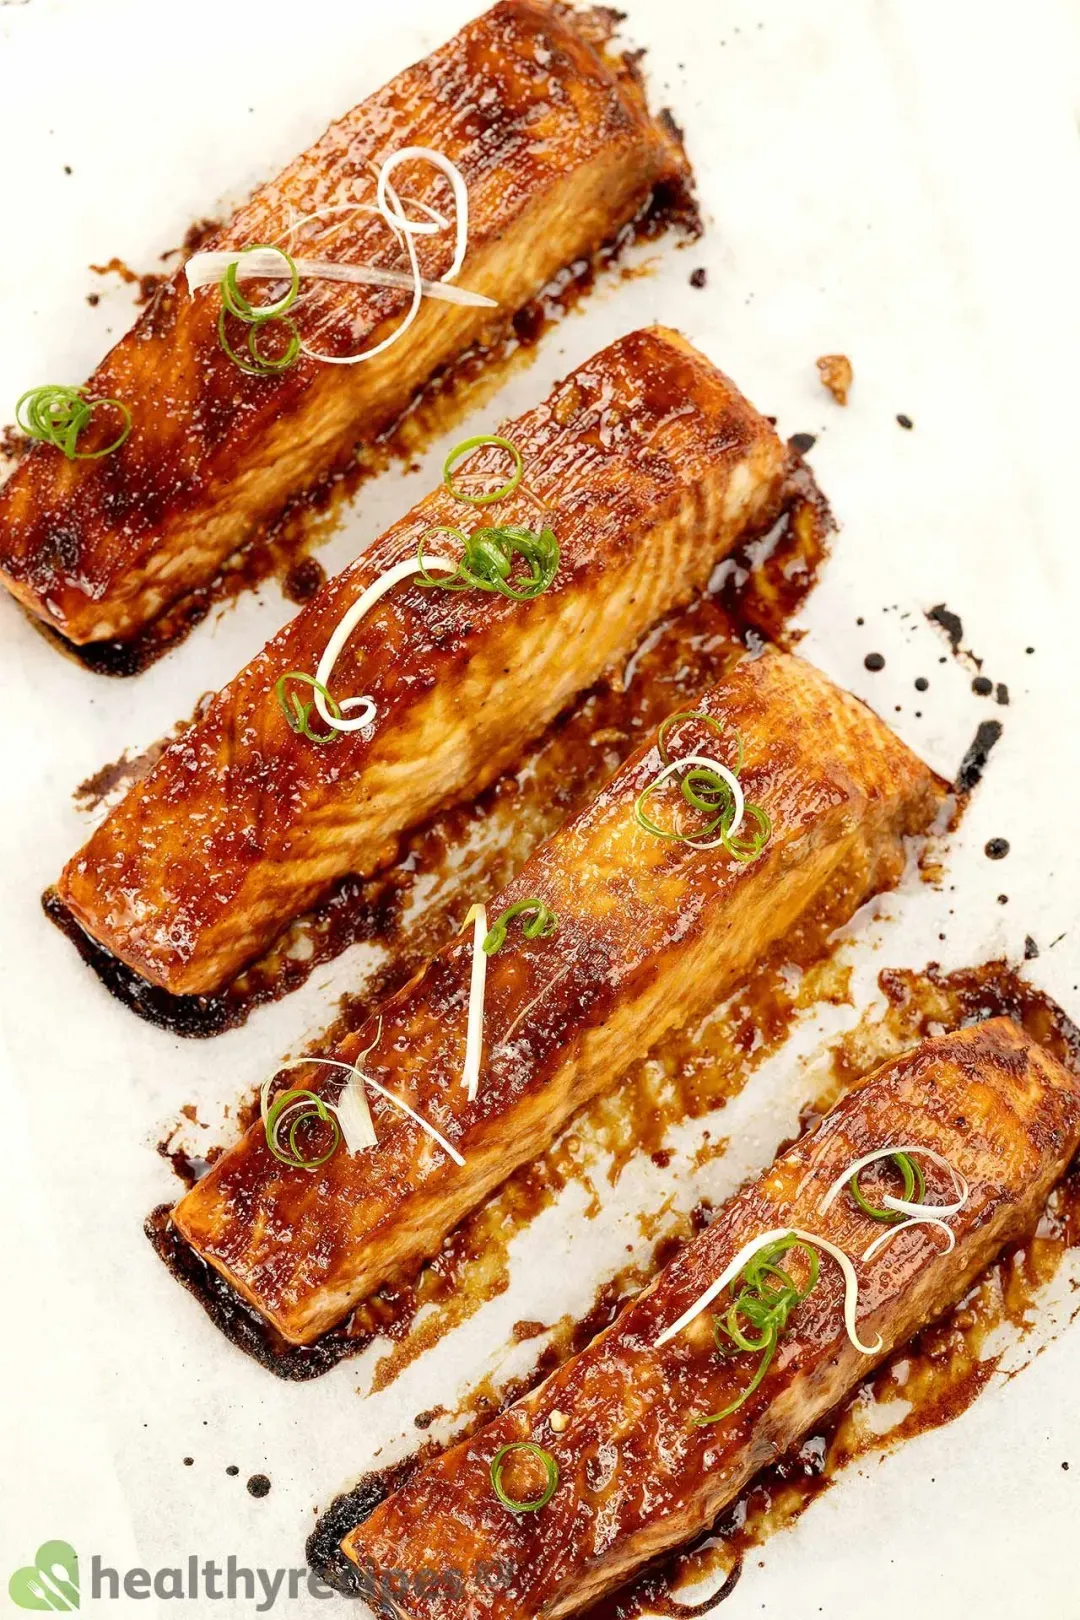 Four pieces of salmon fillets covered in a glossy brown miso sauce